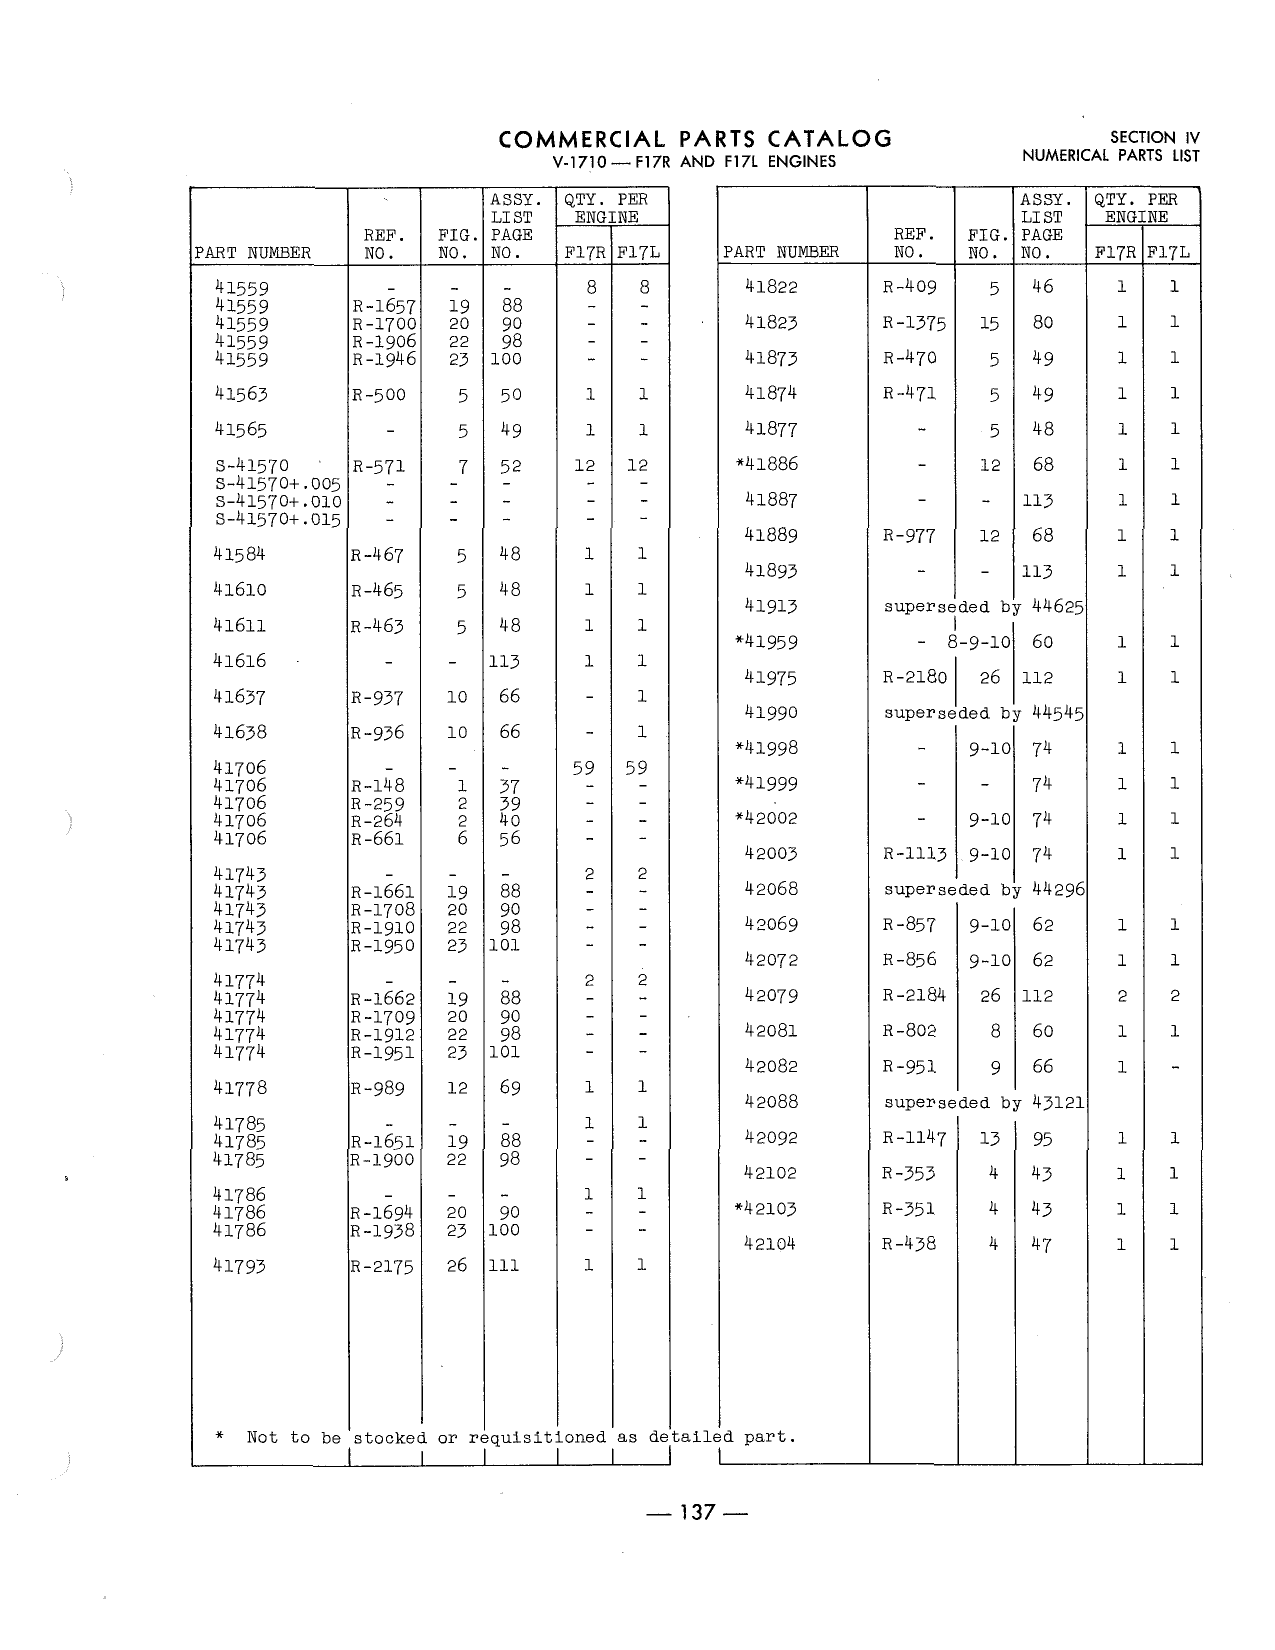 Sample page 141 from AirCorps Library document: Parts Catalog - Allison V-1710-F